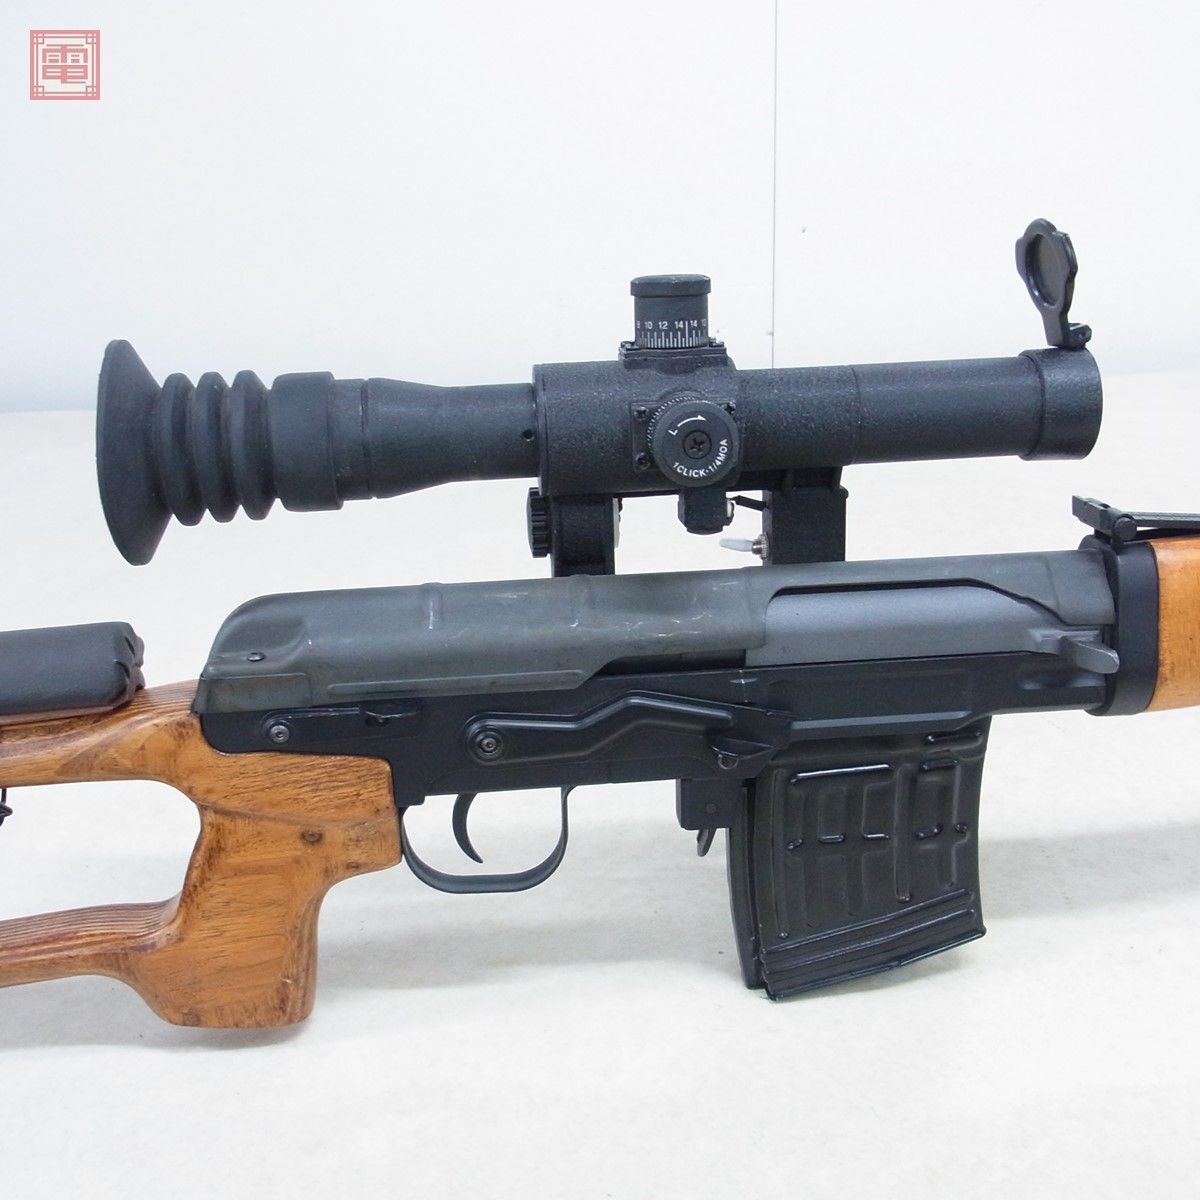 A&K electric gun SVD drag nof real wood wooden stock scope attaching present condition goods [60